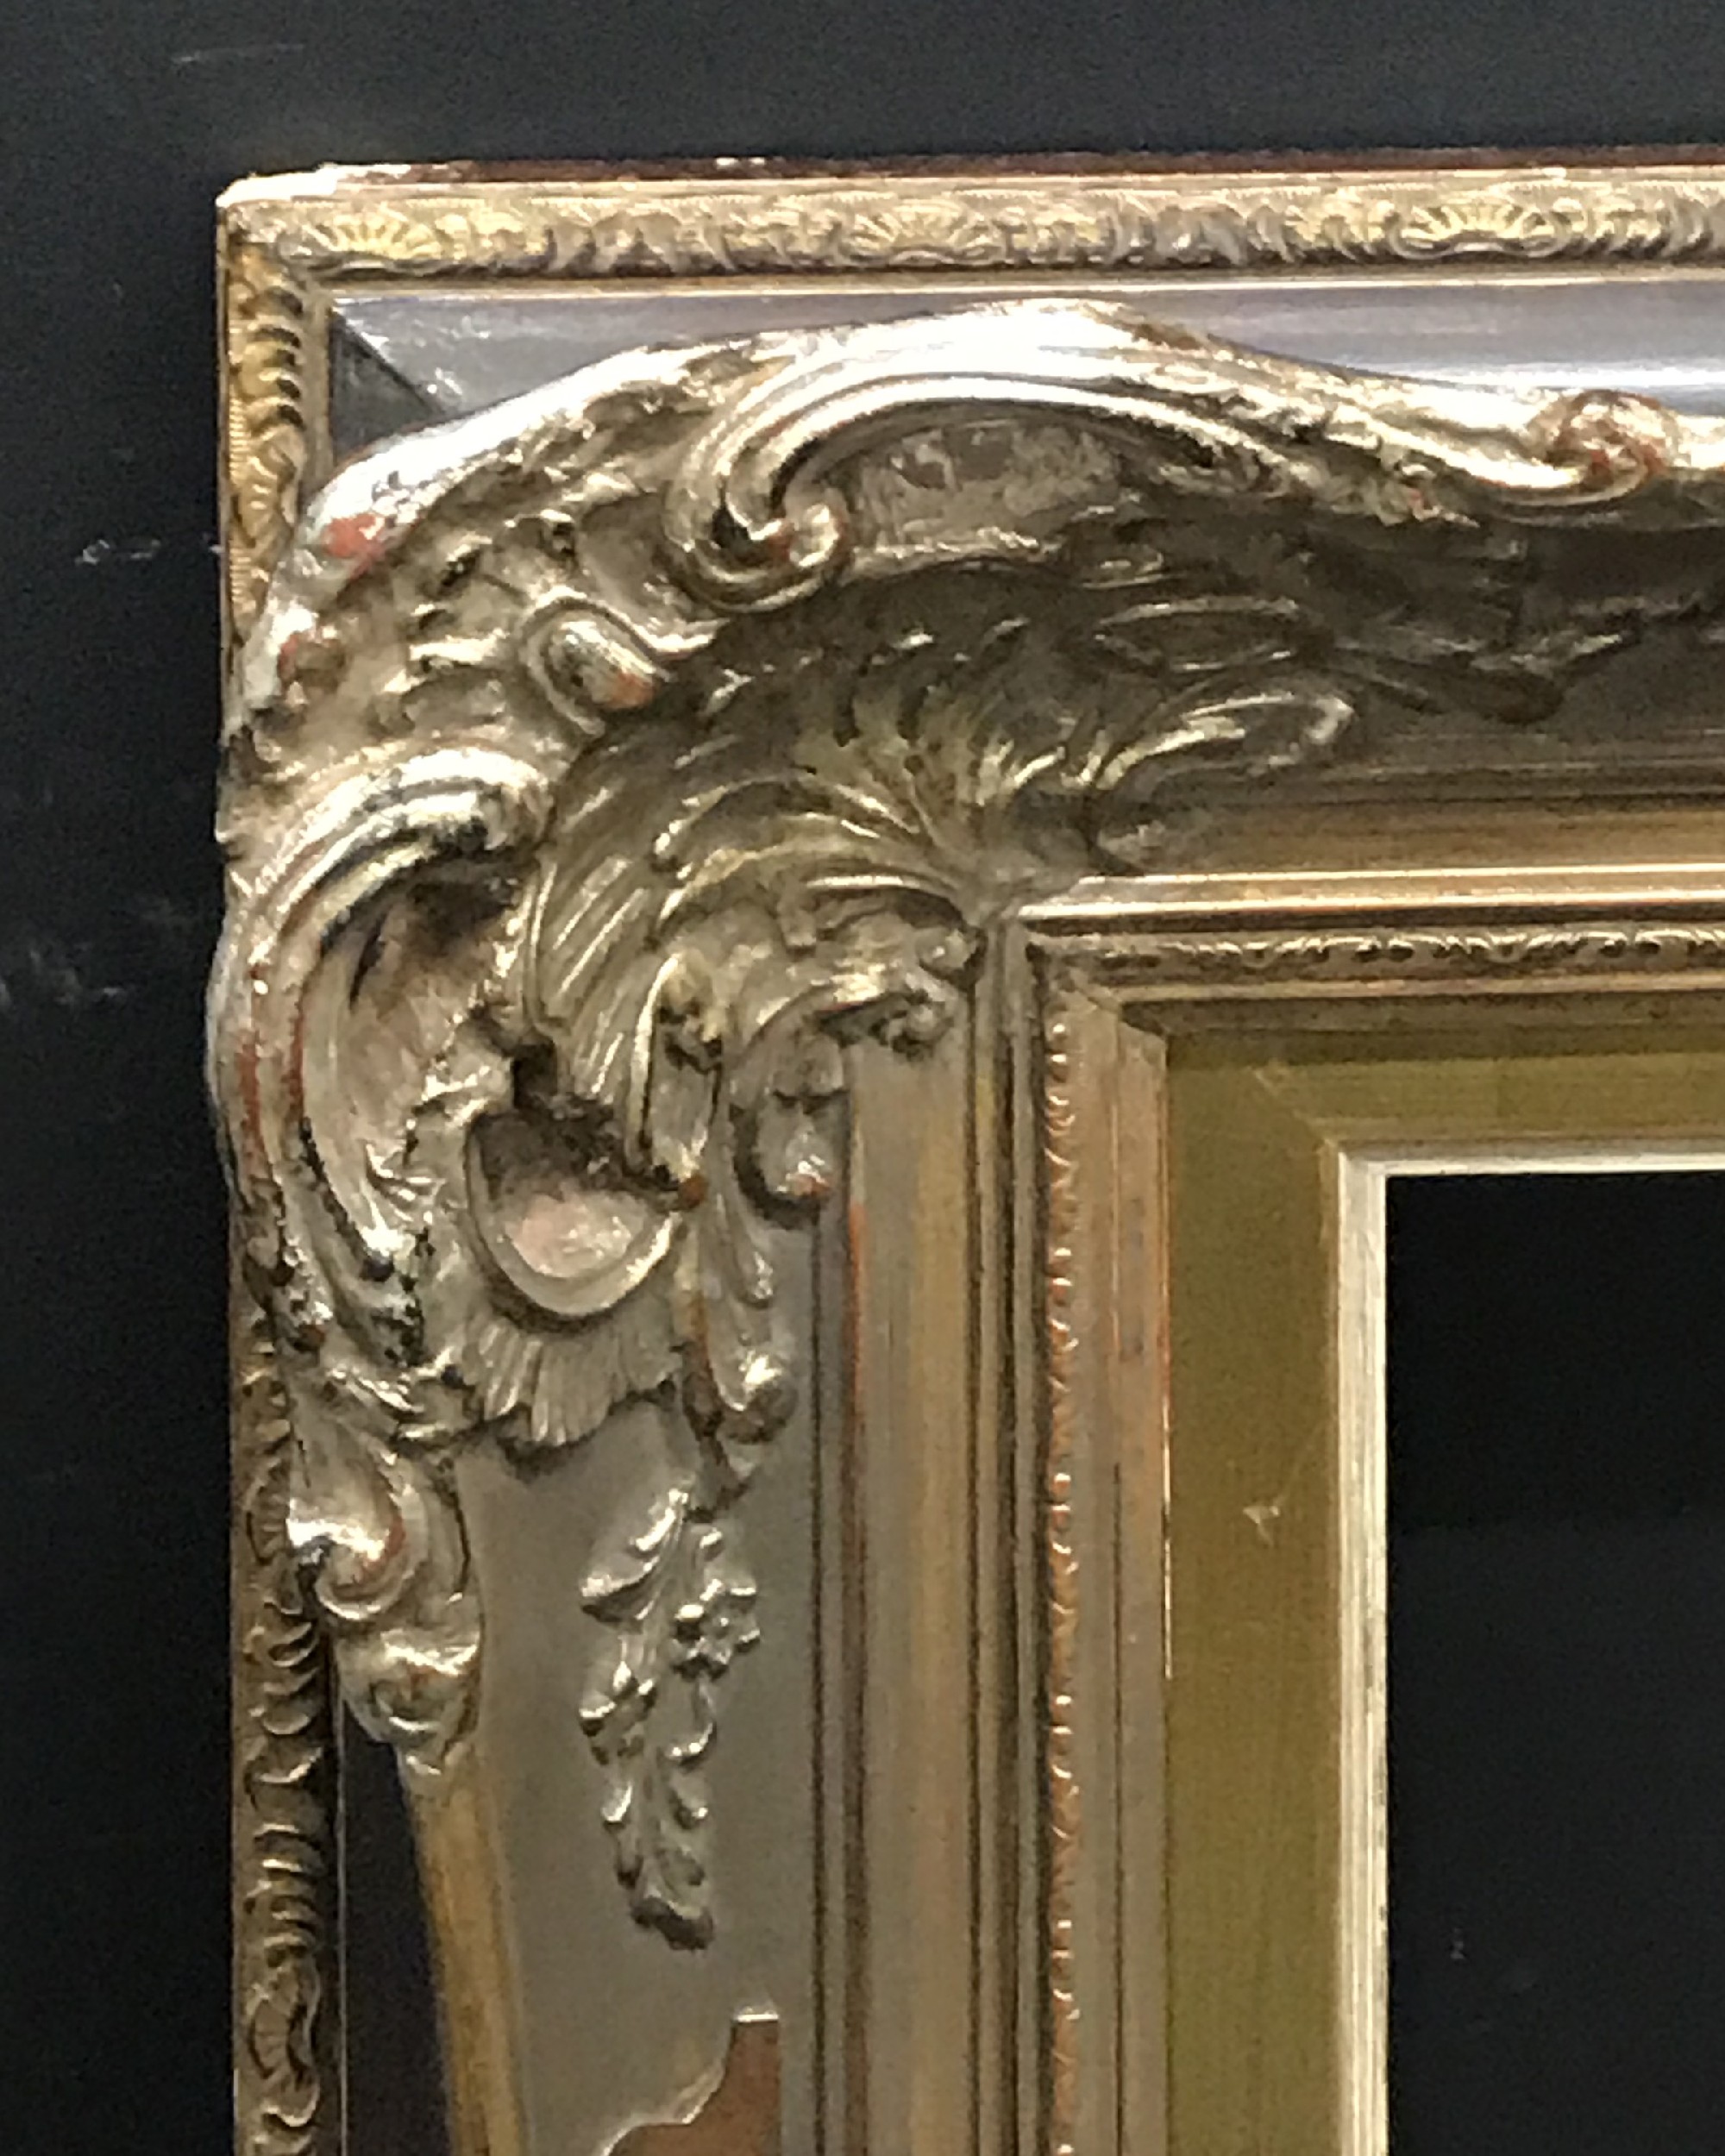 20th Century European School. A Gilt Composition Frame, with Swept and Pierced Centres and